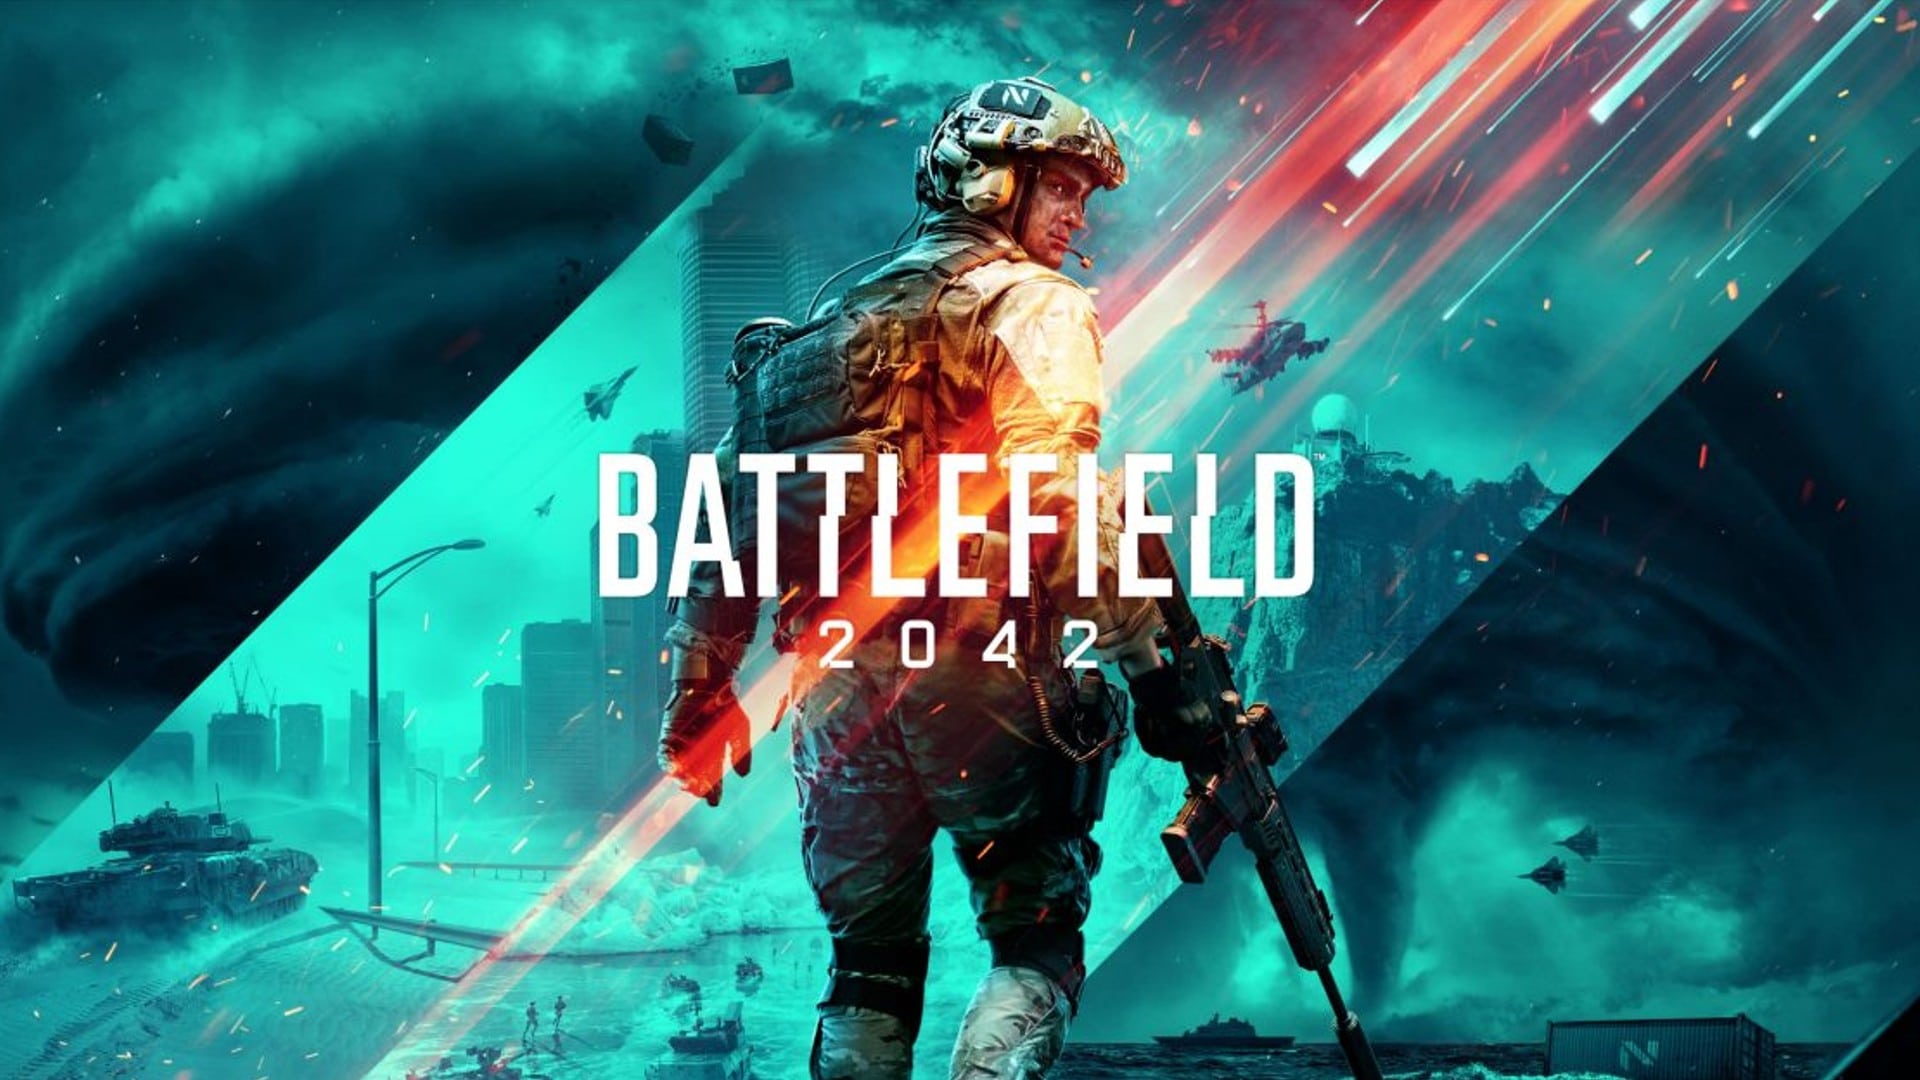 Voice Chat Will Not Be Available When Battlefield 2042 Launches.